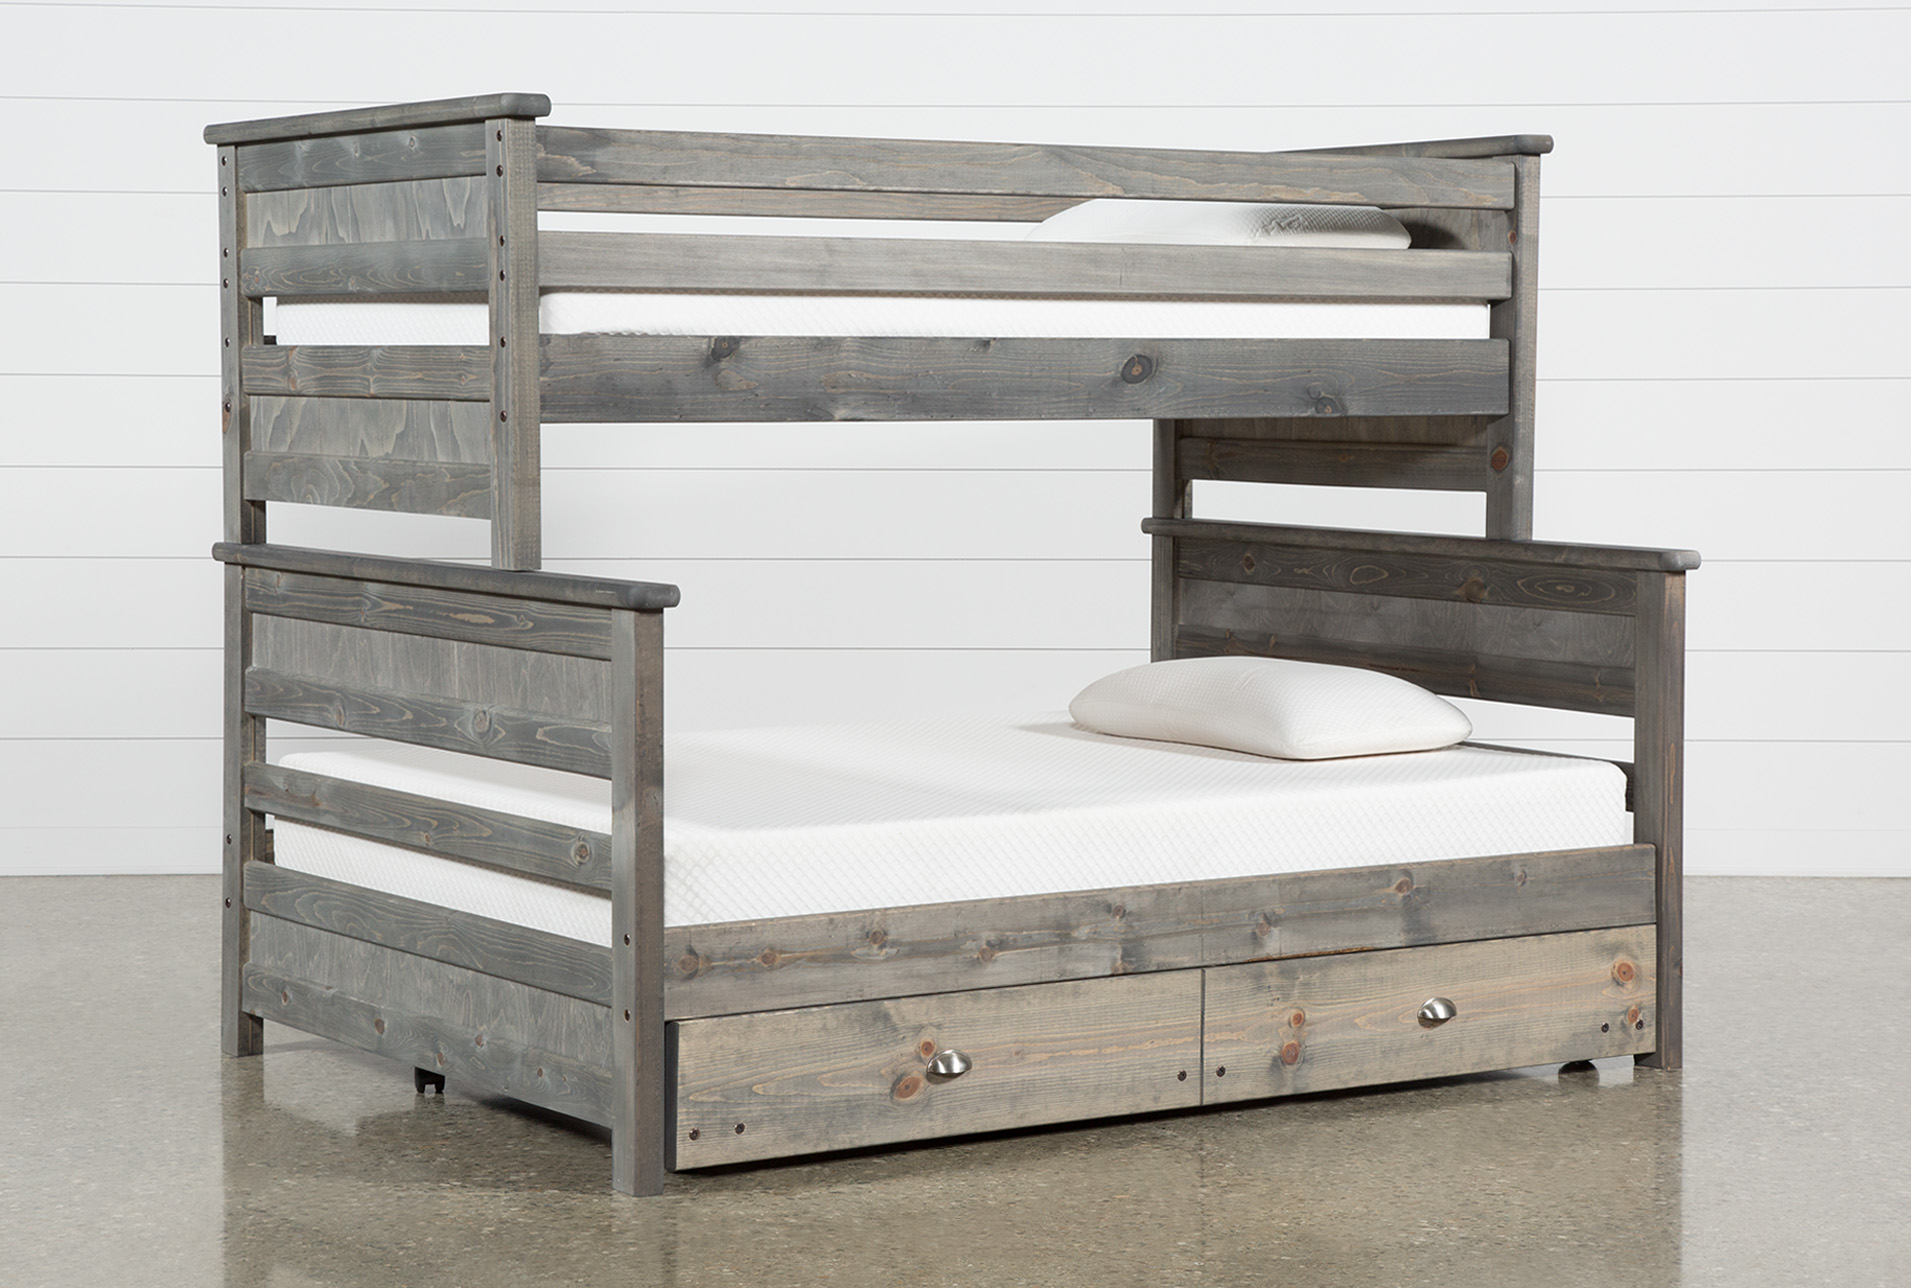 twin over full bunk bed with trundle